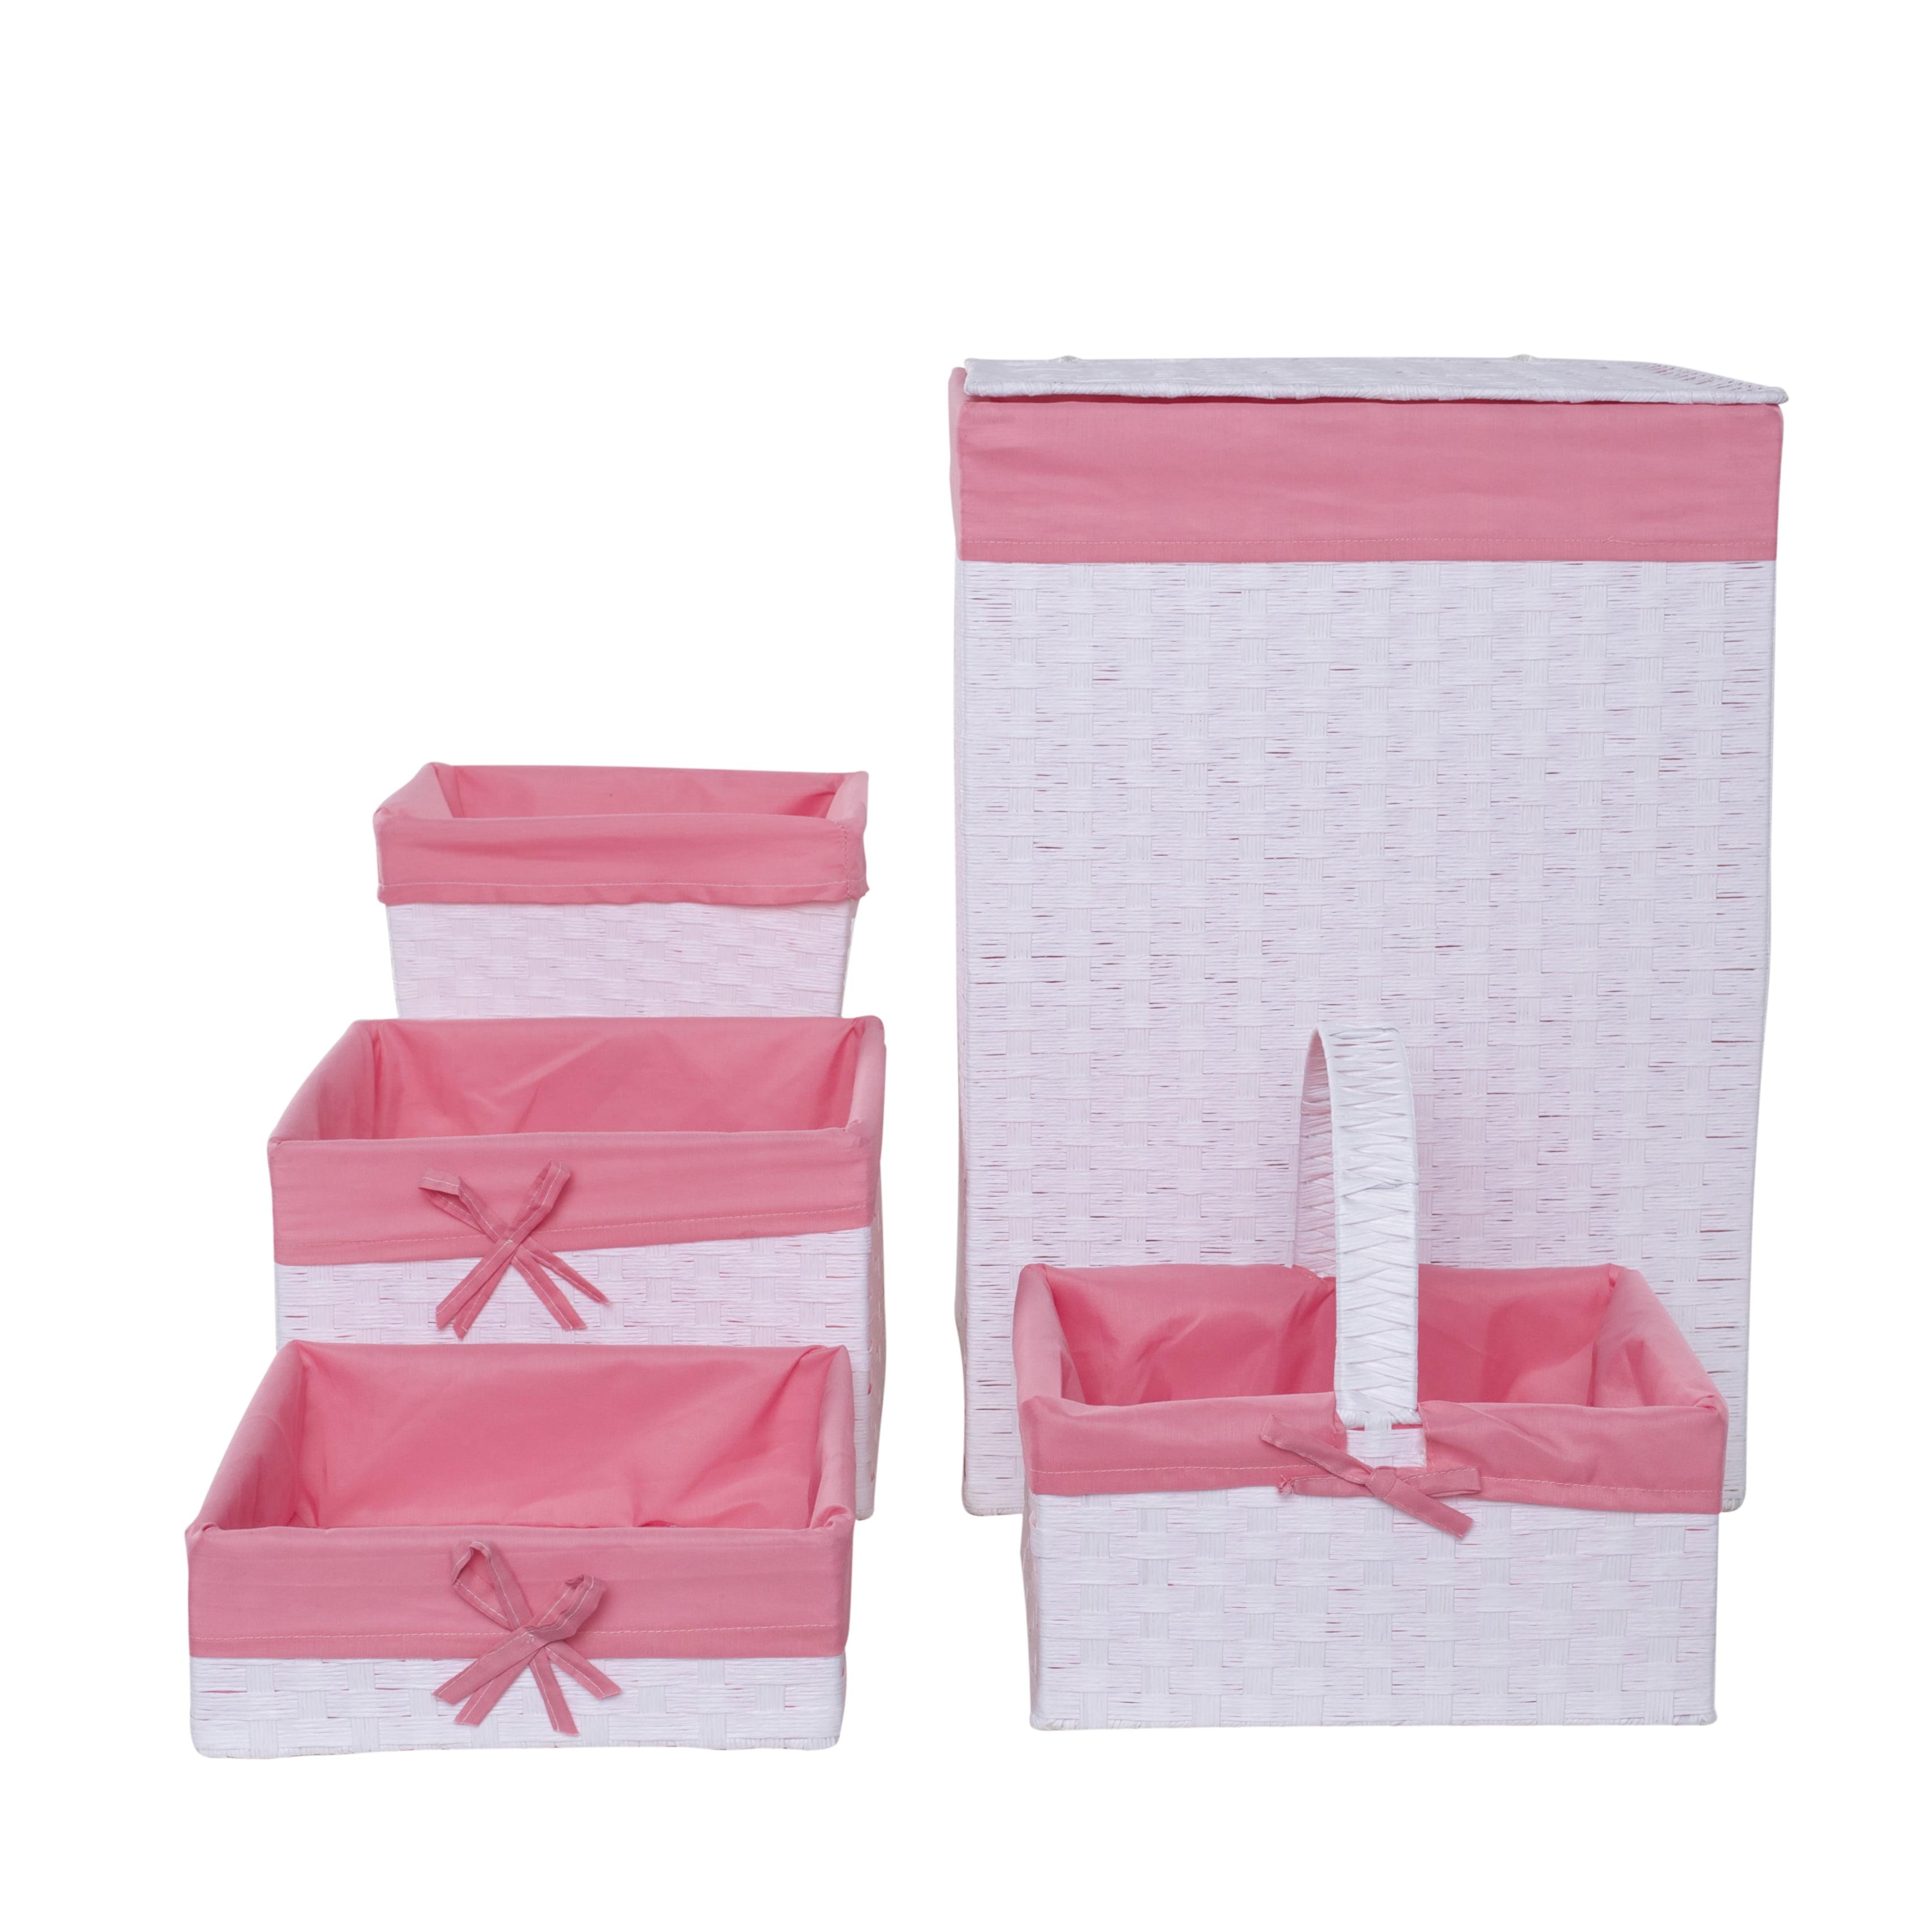 White and Pink Five Piece Weave Pattern Hamper Set